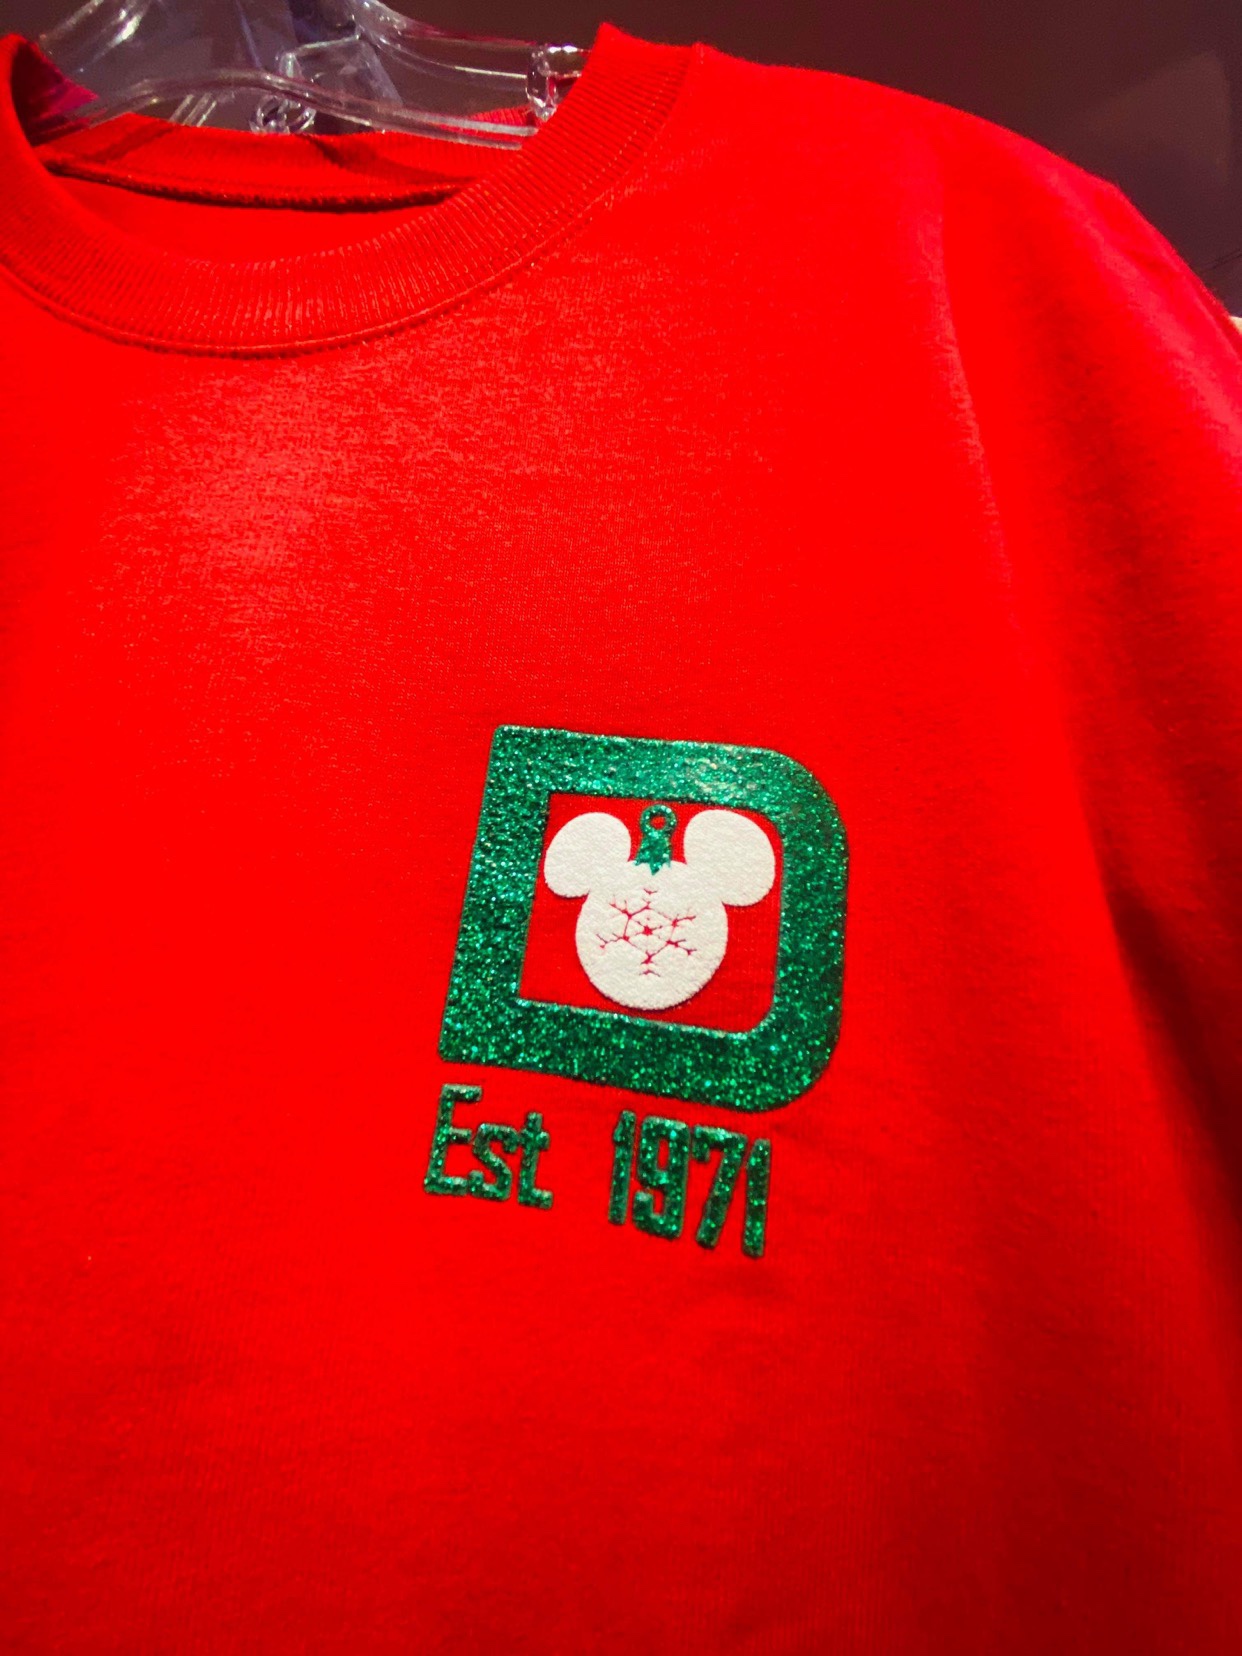 Christmas Sprirt jersey red and green